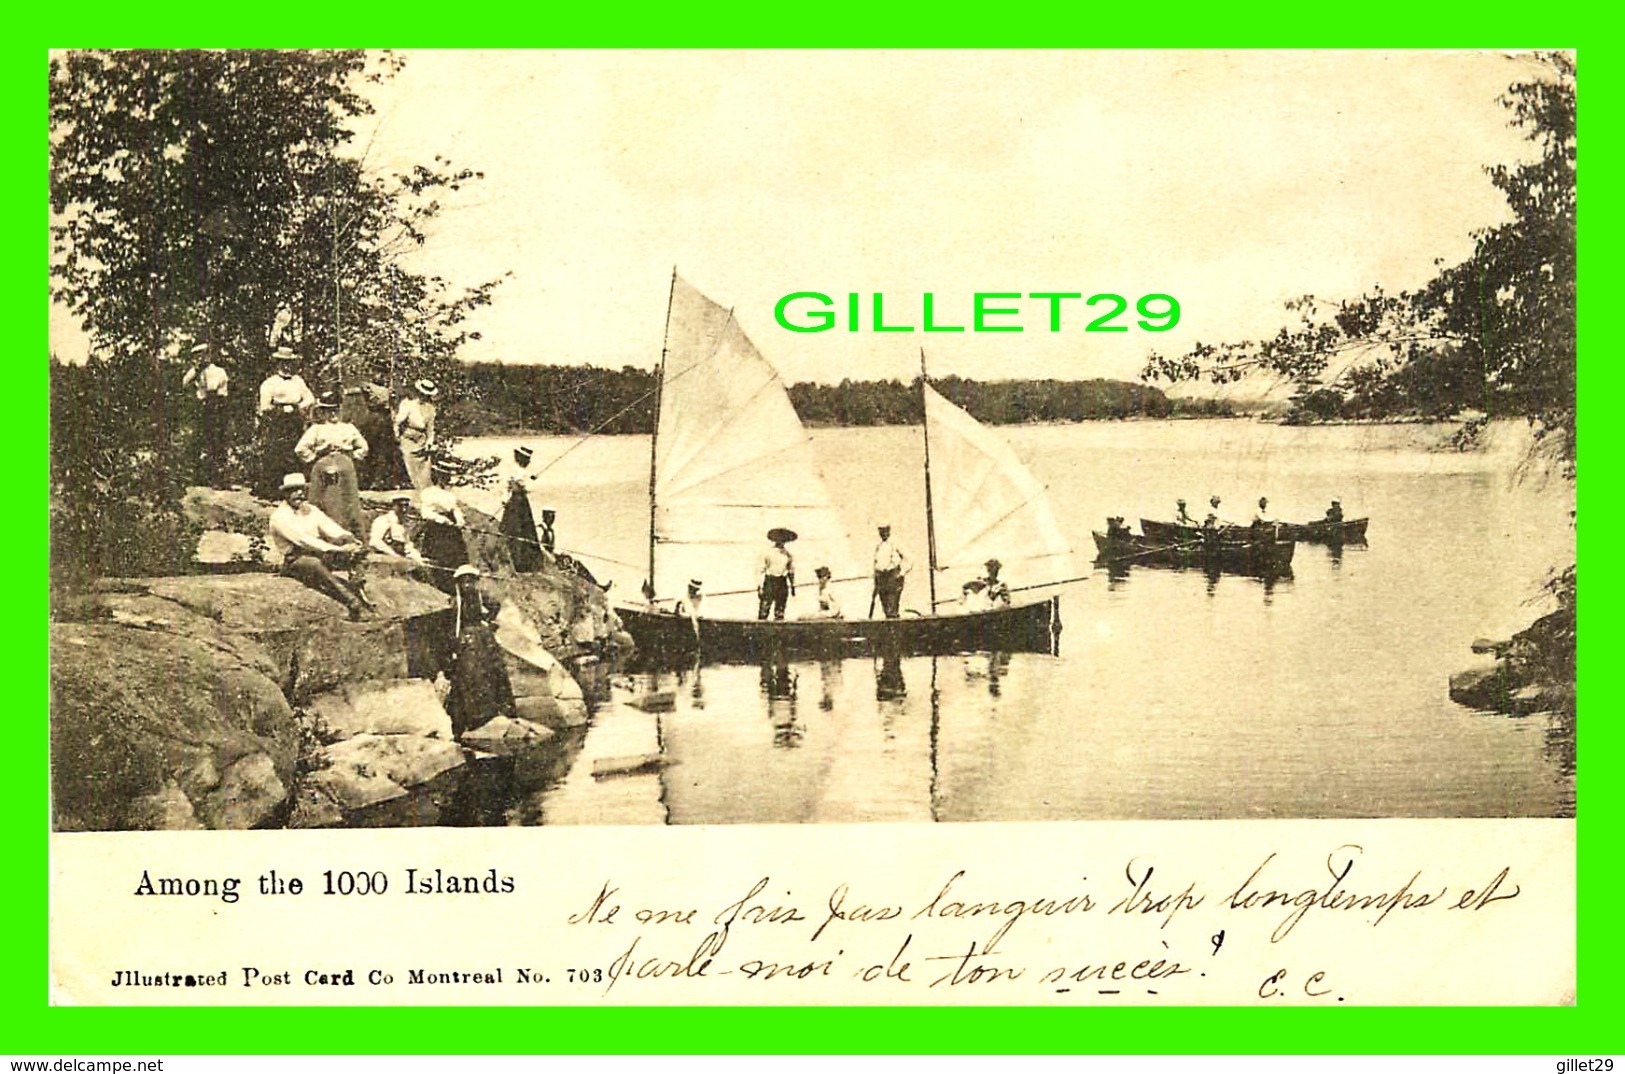 THOUSAND ISLANDS, ONTARIO - AMONG THE 1000 ISLANDS - WELL ANIMATED - TRAVEL IN 1905 - ILLUSTRATED POST CARD CO - - Thousand Islands